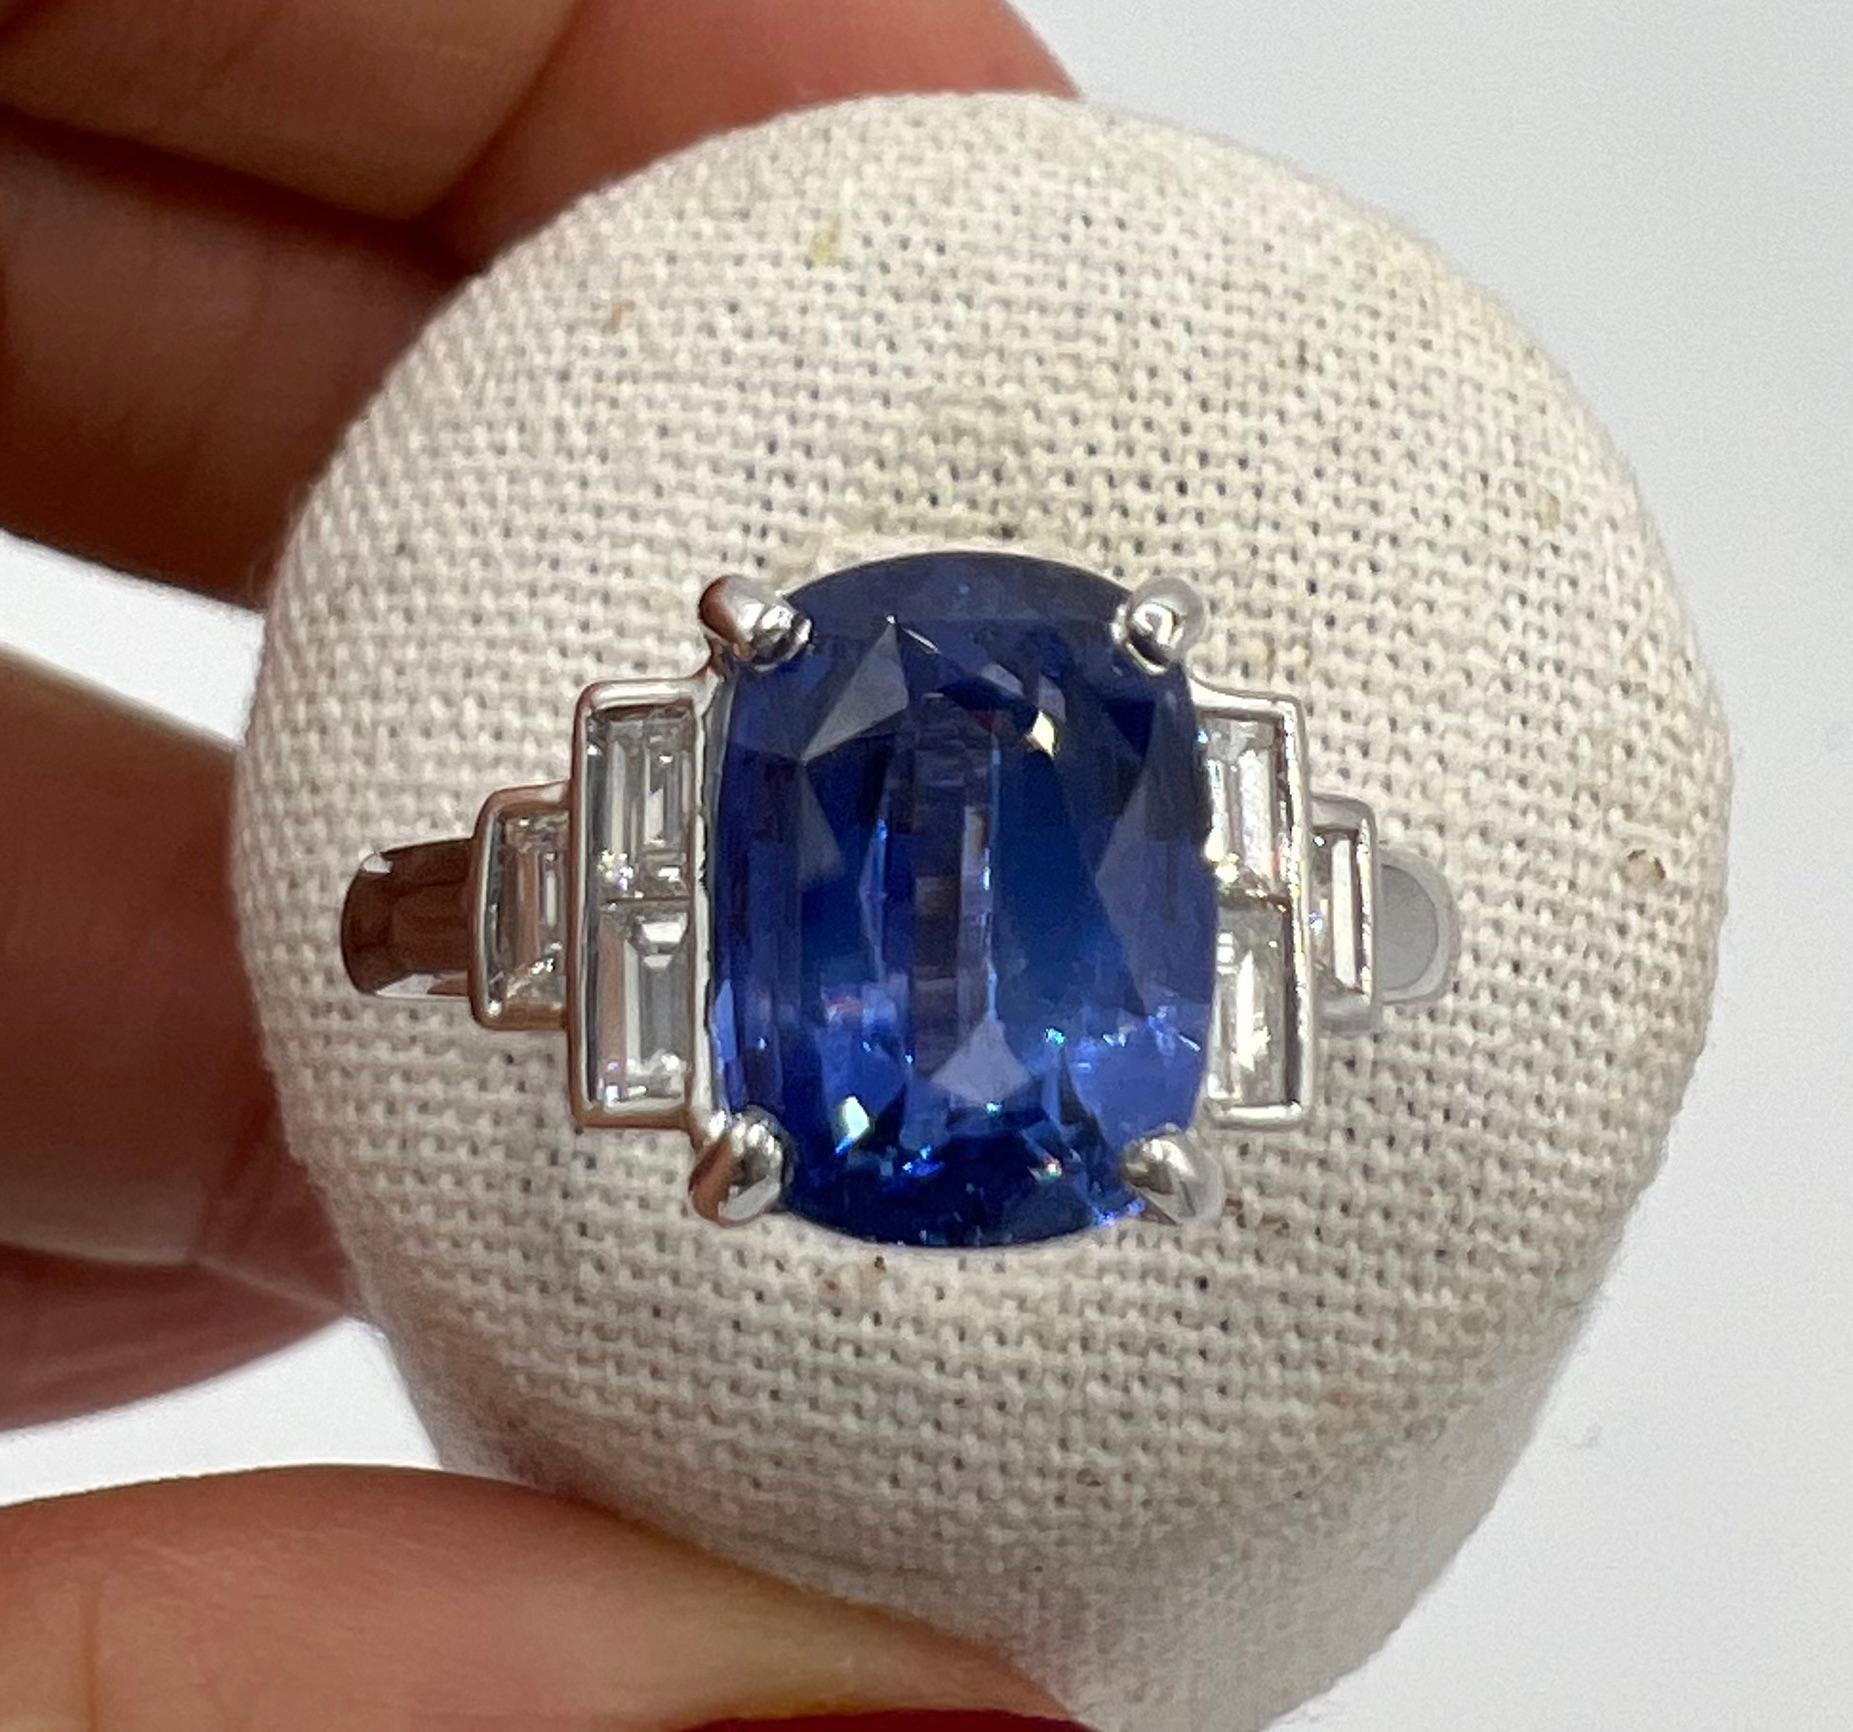 Superb oval blue sapphire of 3.46 ct surrounded by baguette-cut diamonds for 0.35 ct, very luminous.
This ring in very good condition weighs 4.88 grams
his height: 54 or 6-3/4
